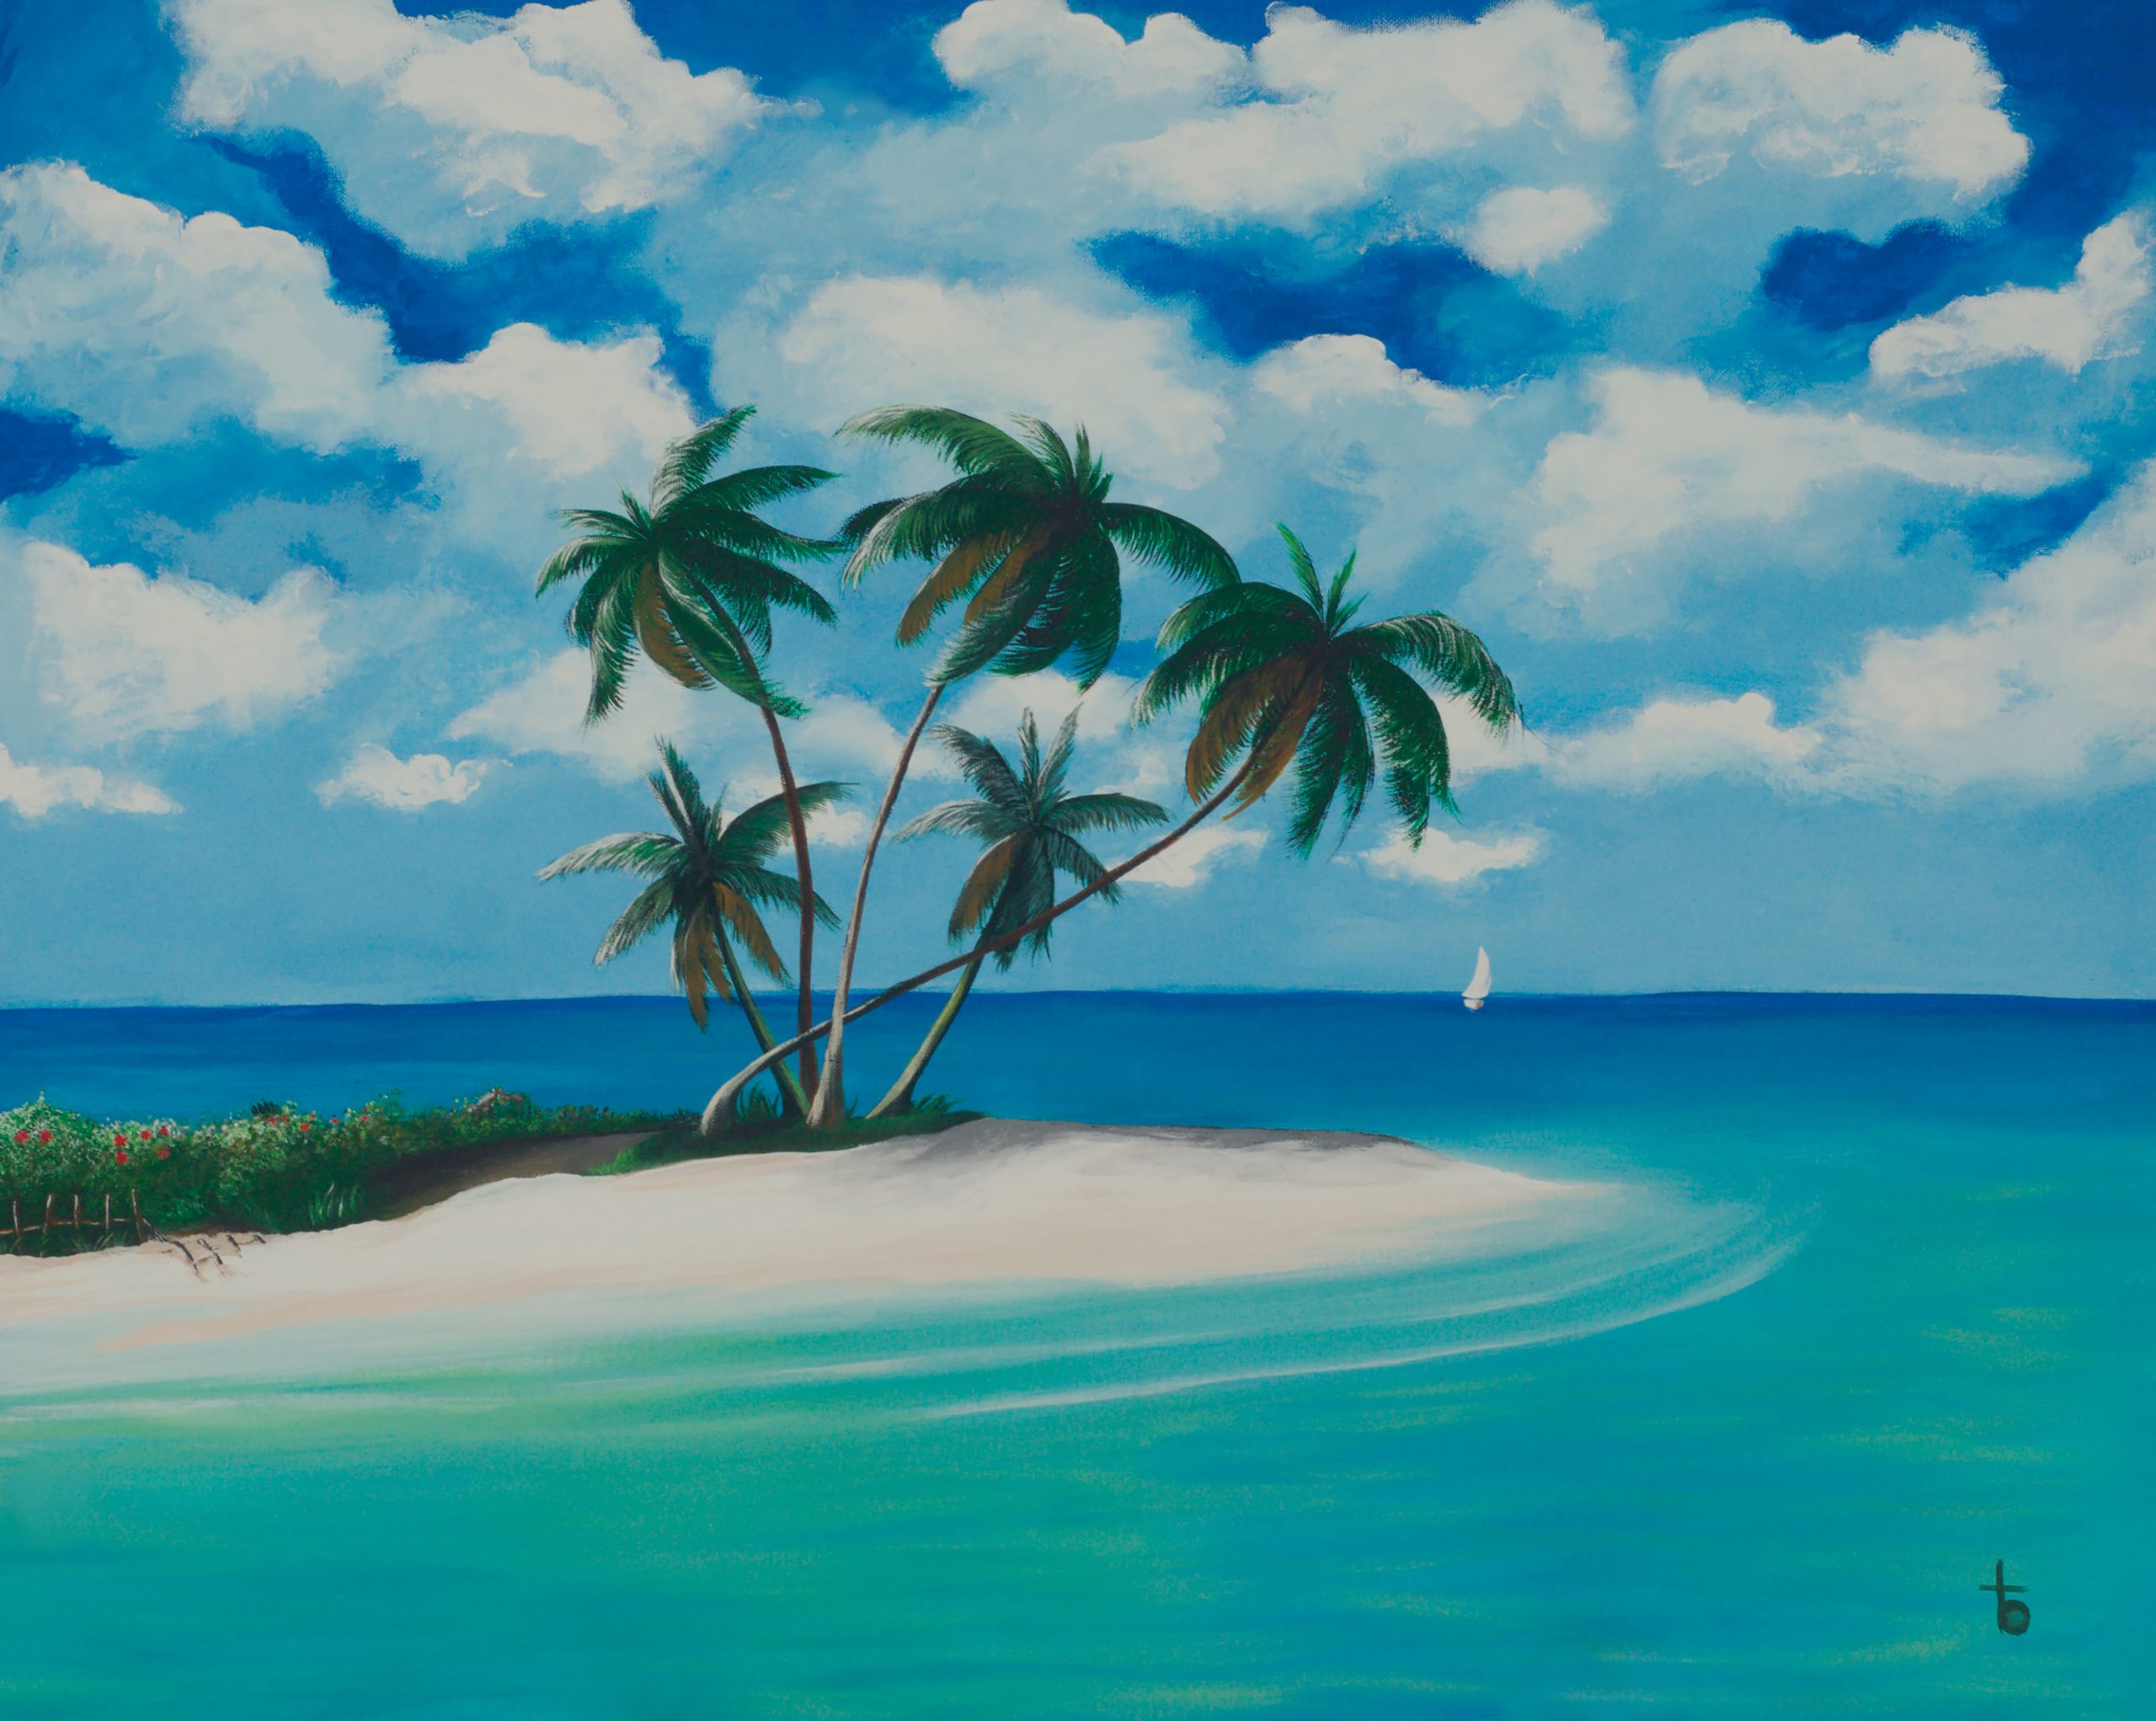 Large Tropical Island Acrylic Painting on Canvas by local Florida artist.